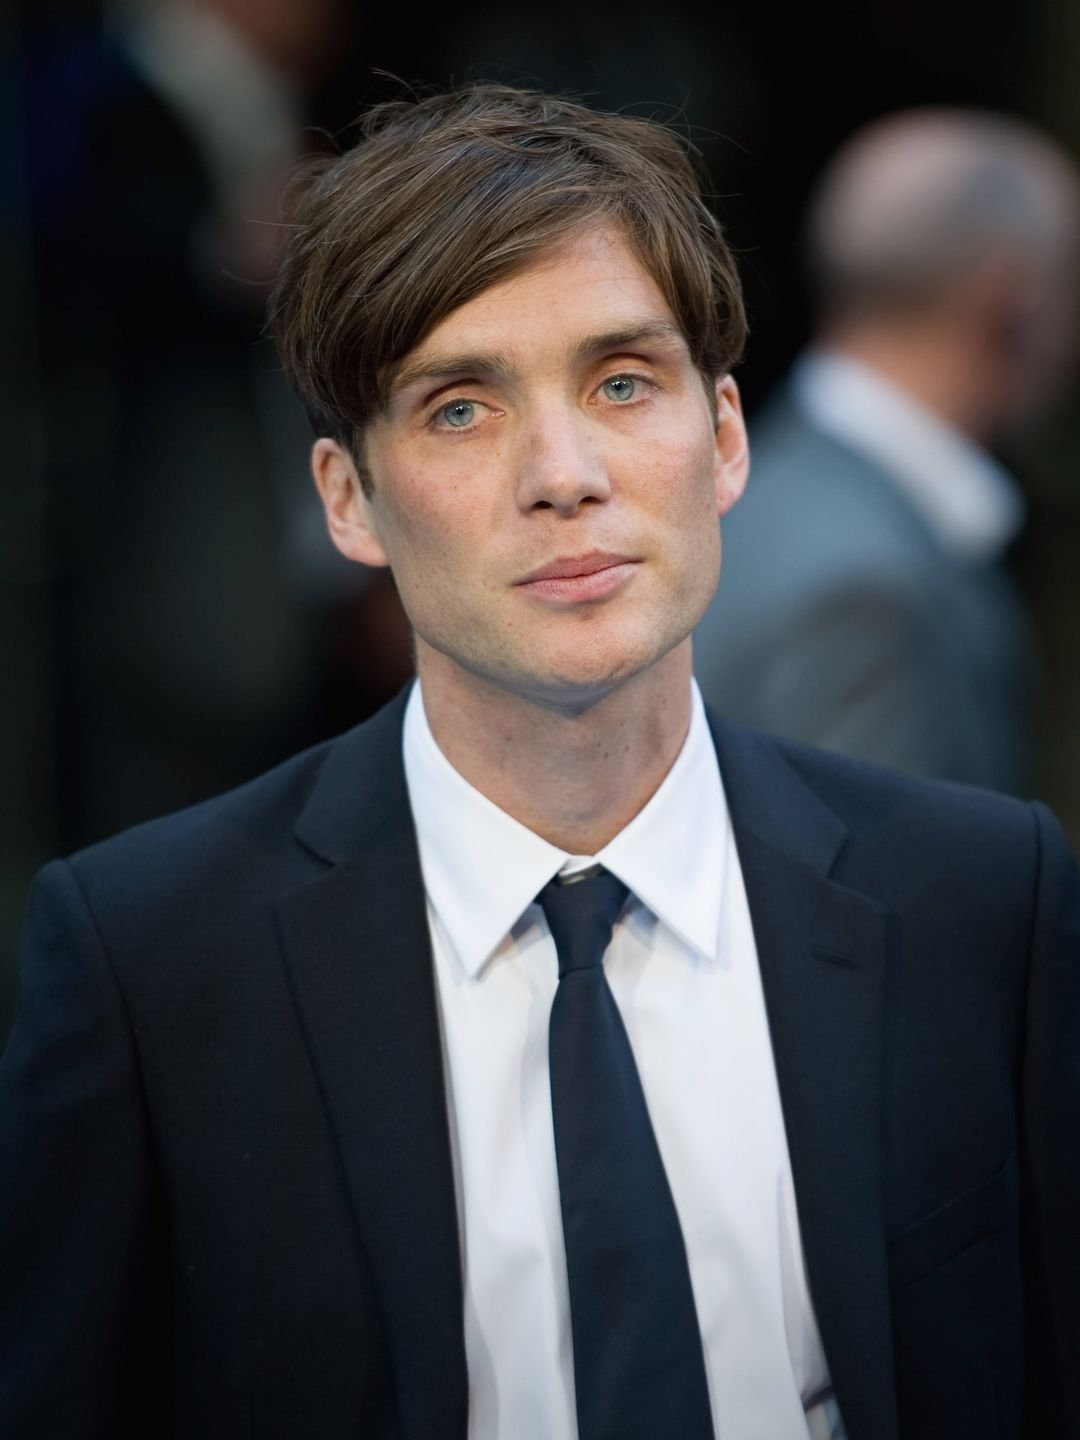 Cillian Murphy how did he became famous